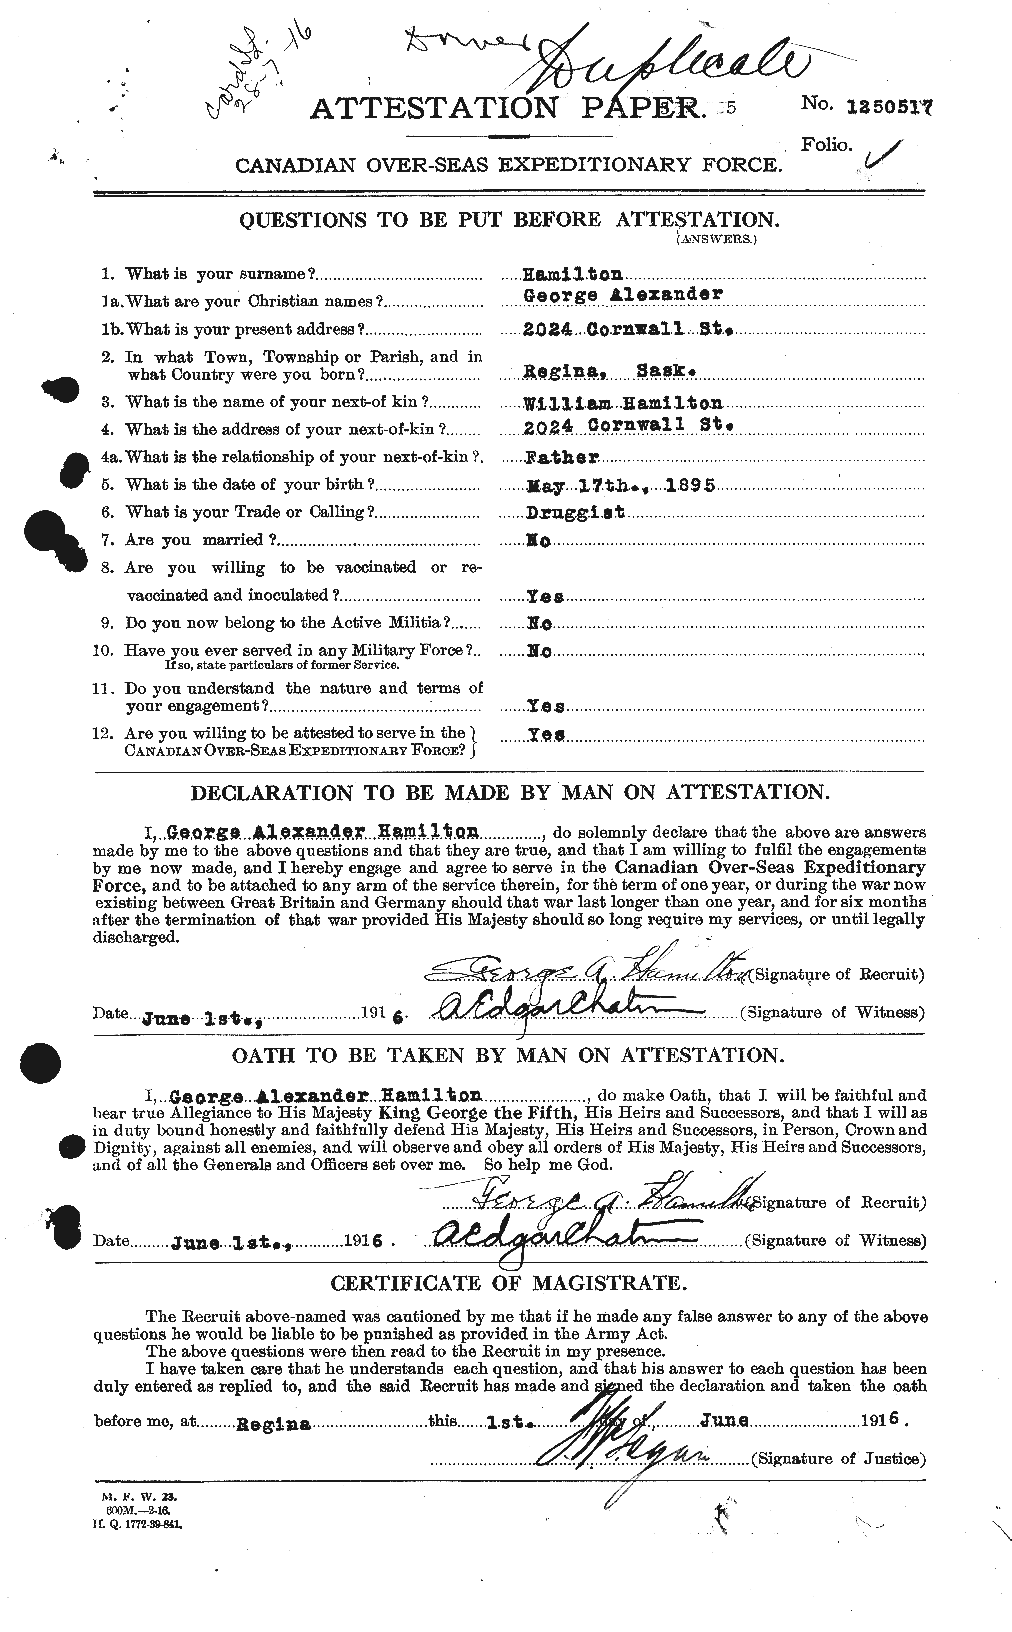 Personnel Records of the First World War - CEF 372446a